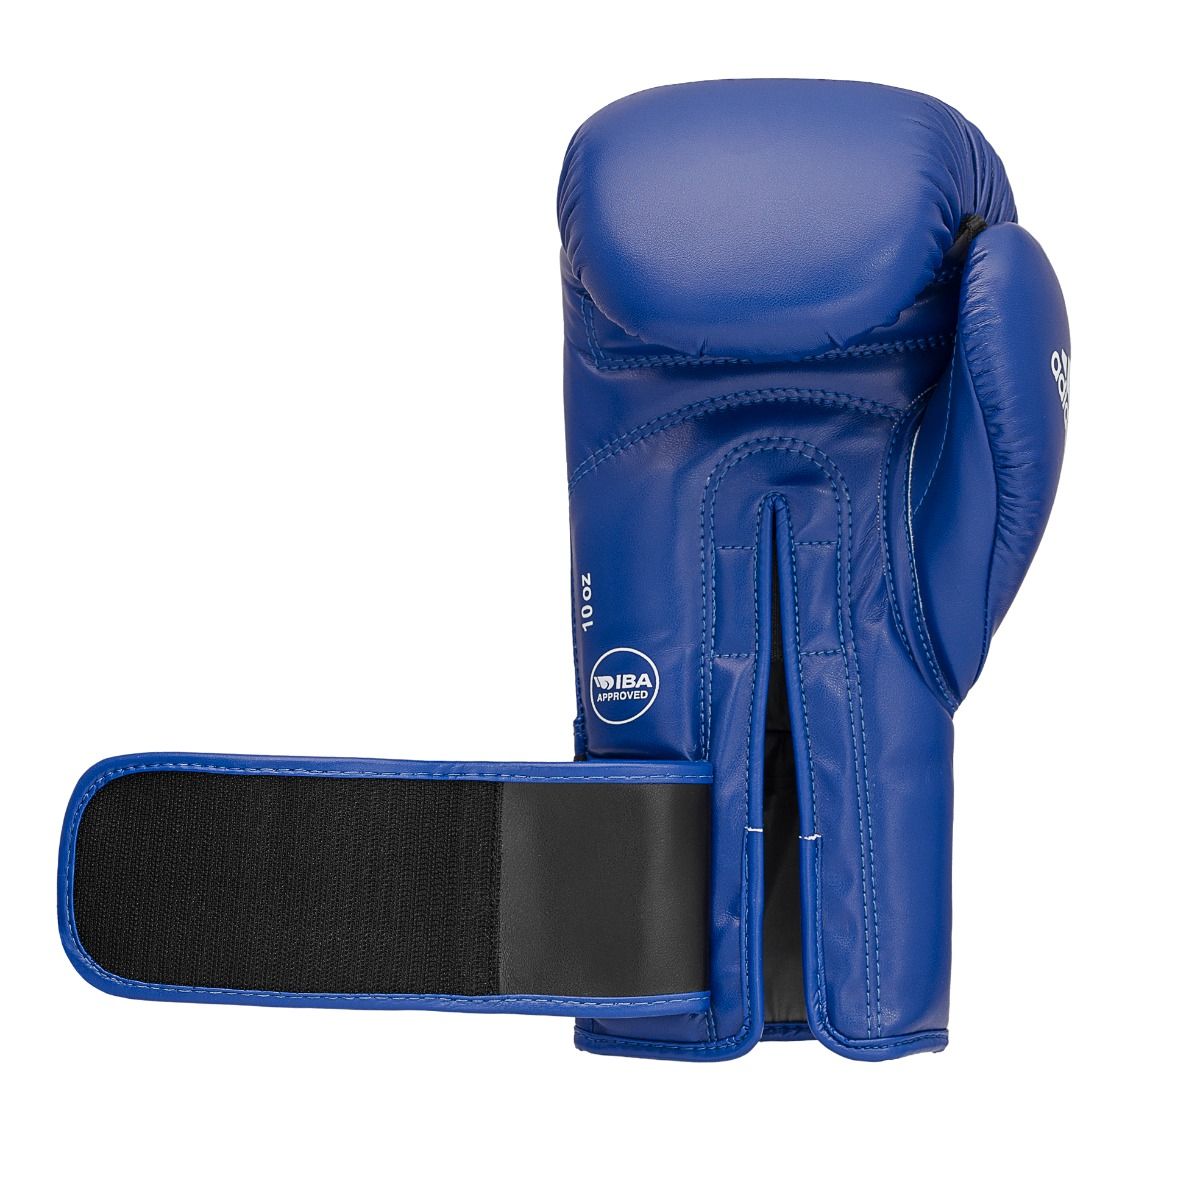 Adidas AIBA Approved Gloves